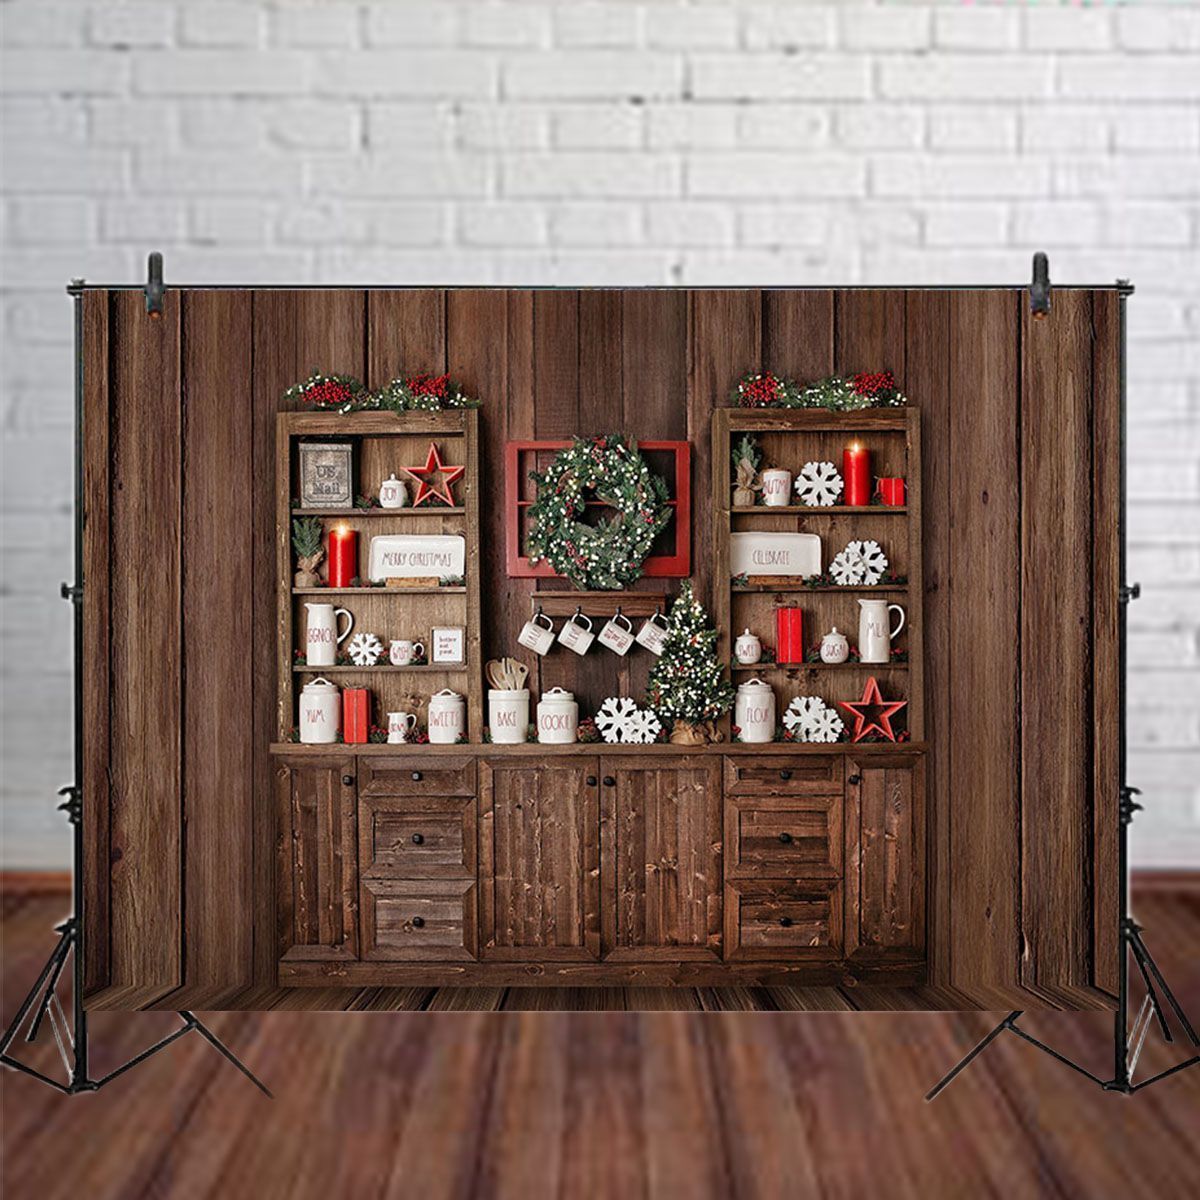 5x3FT-7x5FT-8x6FT-Wooden-Wall-Christmas-Cabinet-Photography-Backdrop-Background-Studio-Prop-1609474